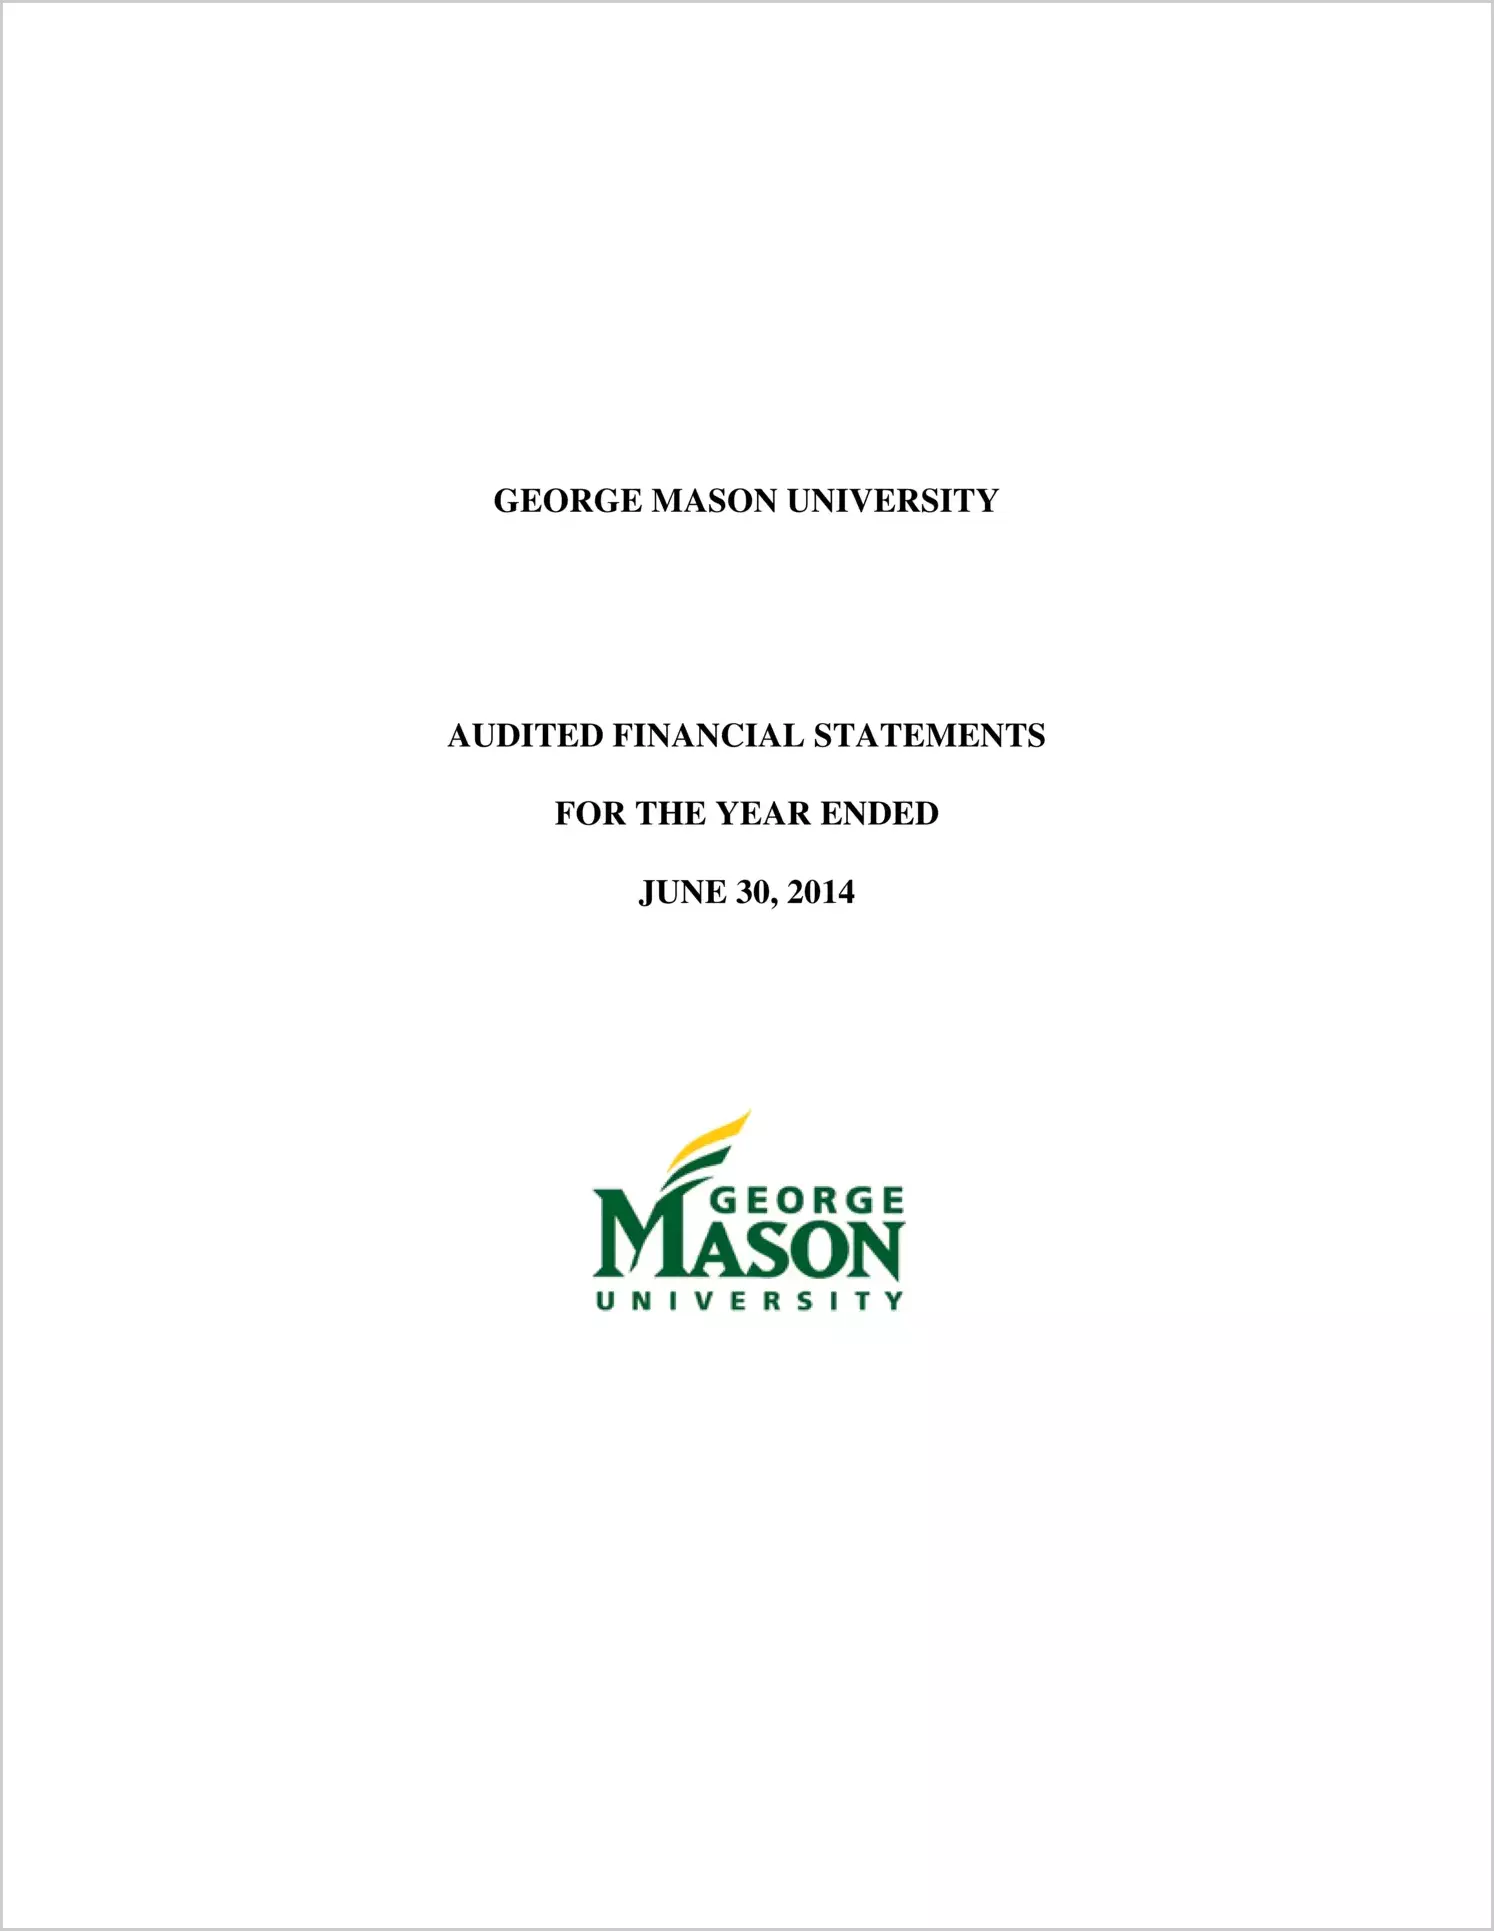 George Mason University Financial Statements for the year ended June 30, 2014